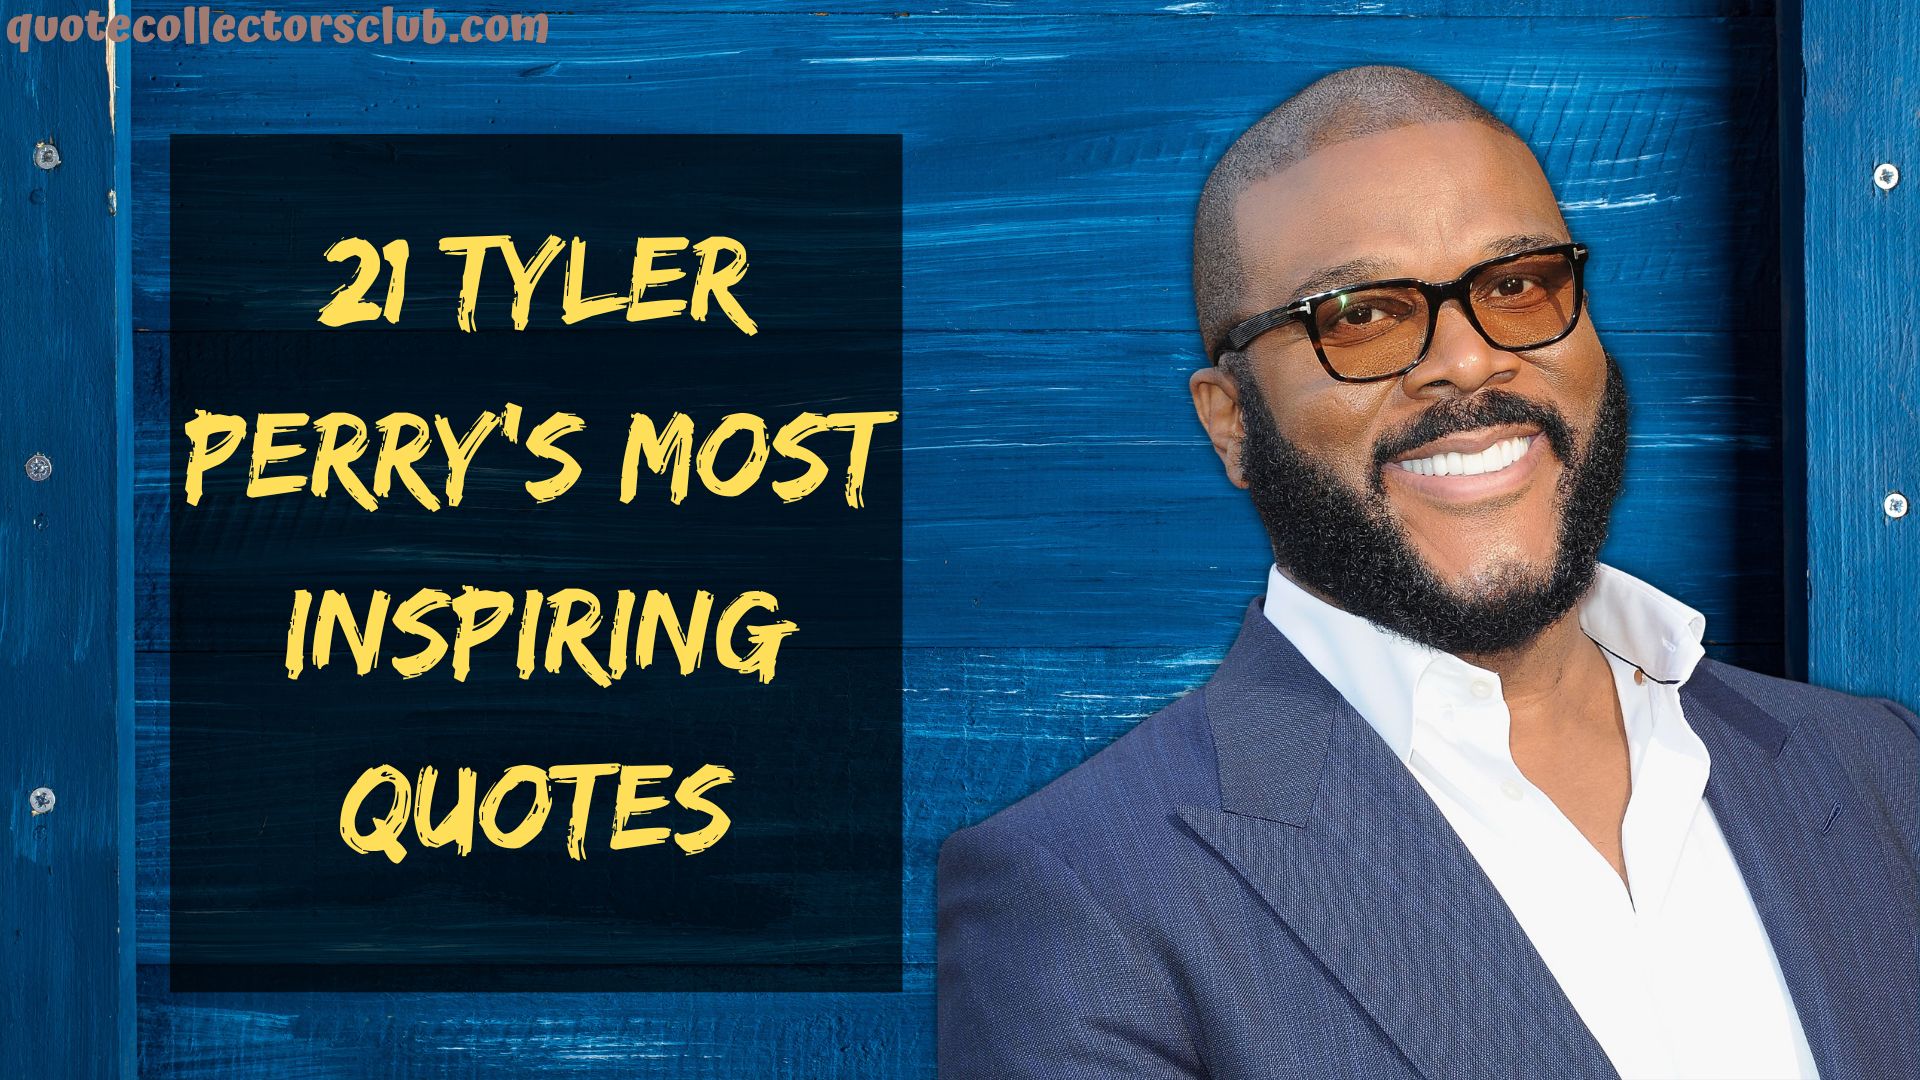 21 Tyler Perrys Most Inspiring Quotes Quote Collectors Club